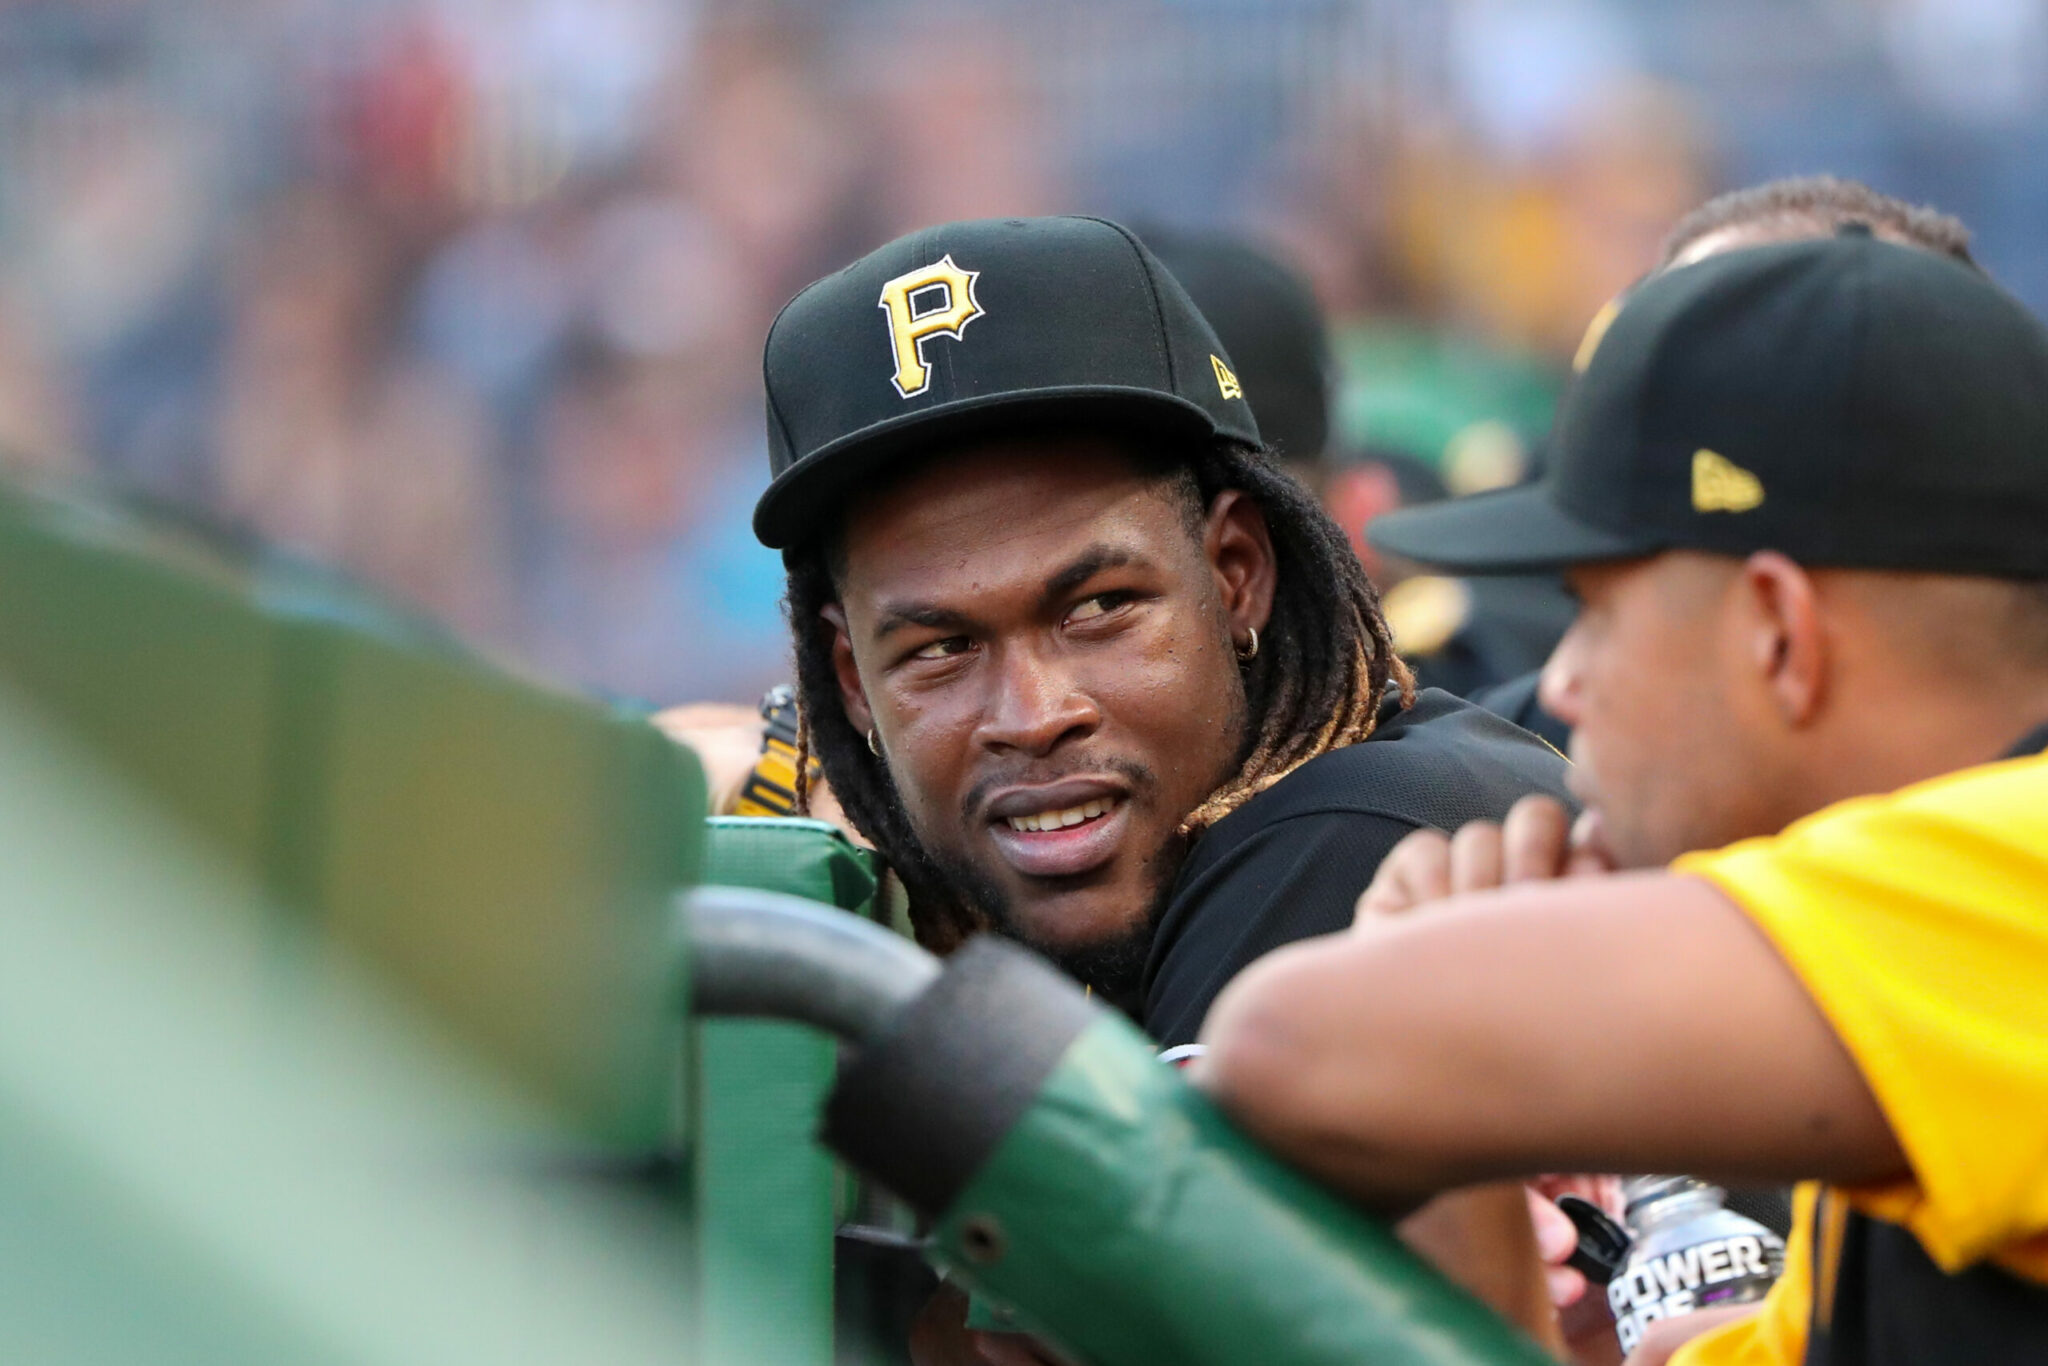 Williams: Breaking Down the Pirates Roster After the Deadline